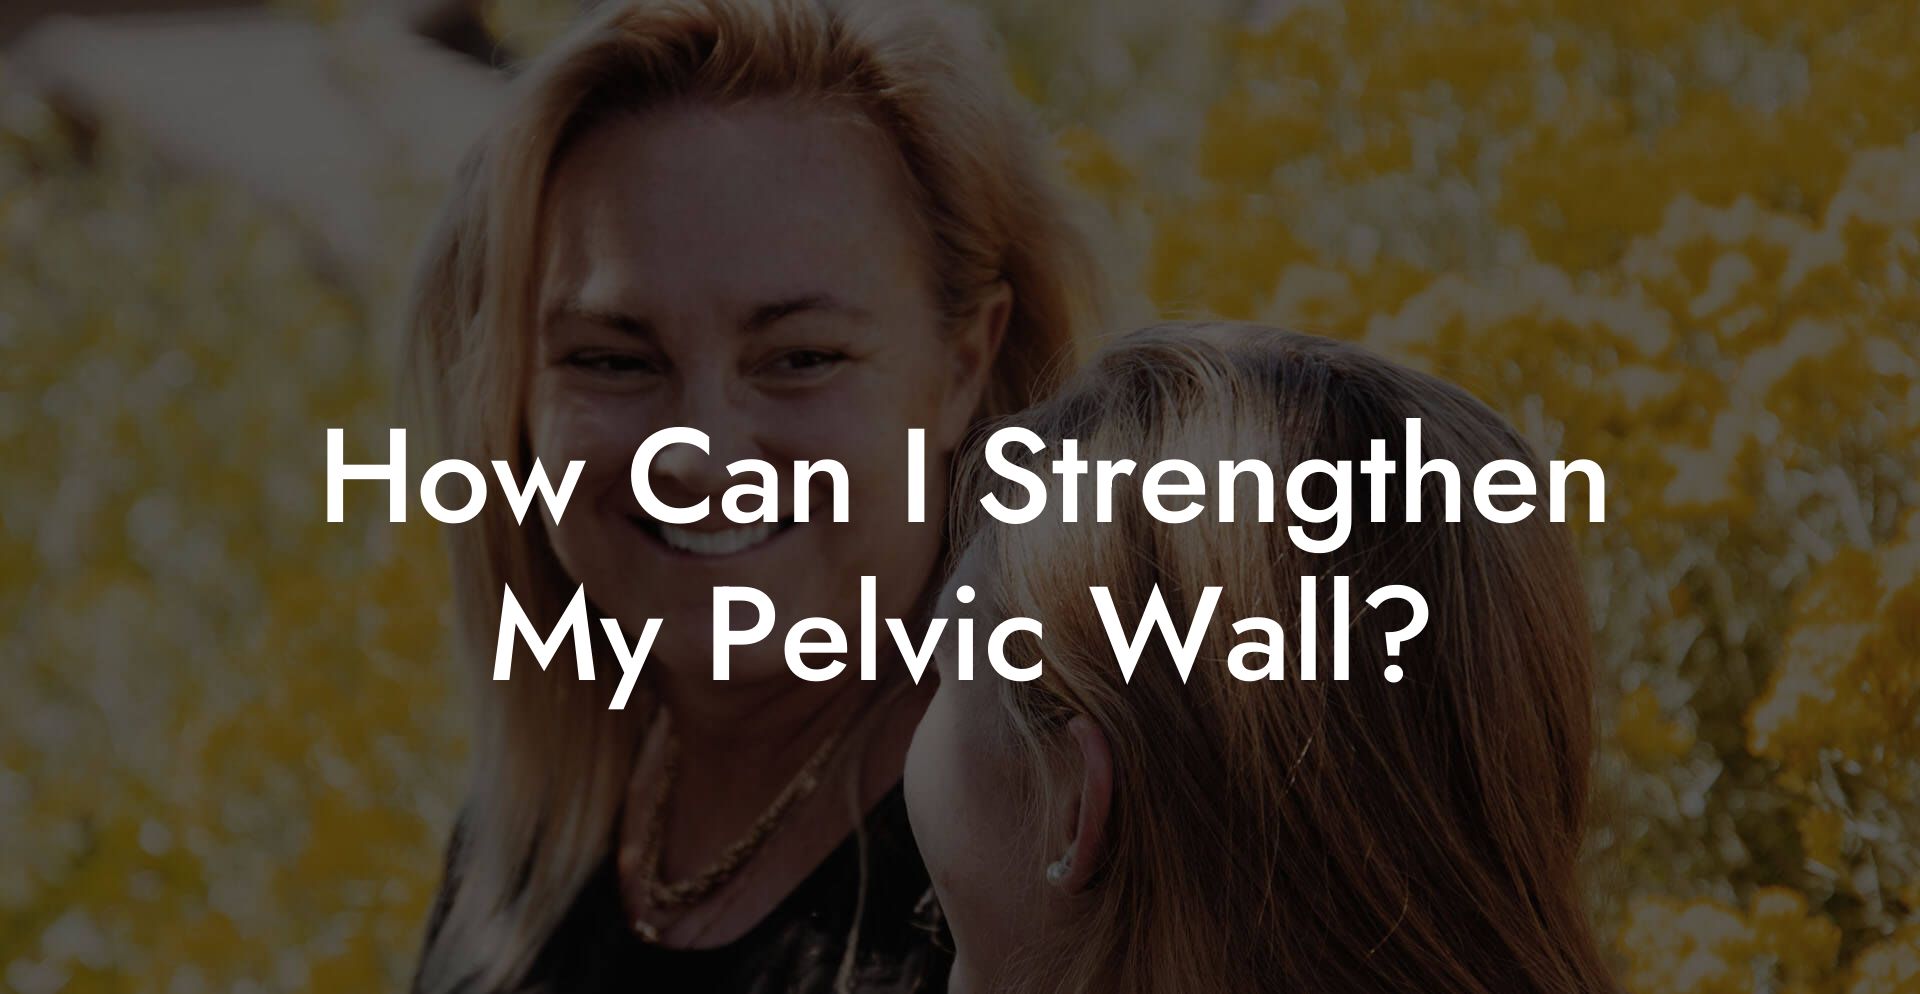 How Can I Strengthen My Pelvic Wall?